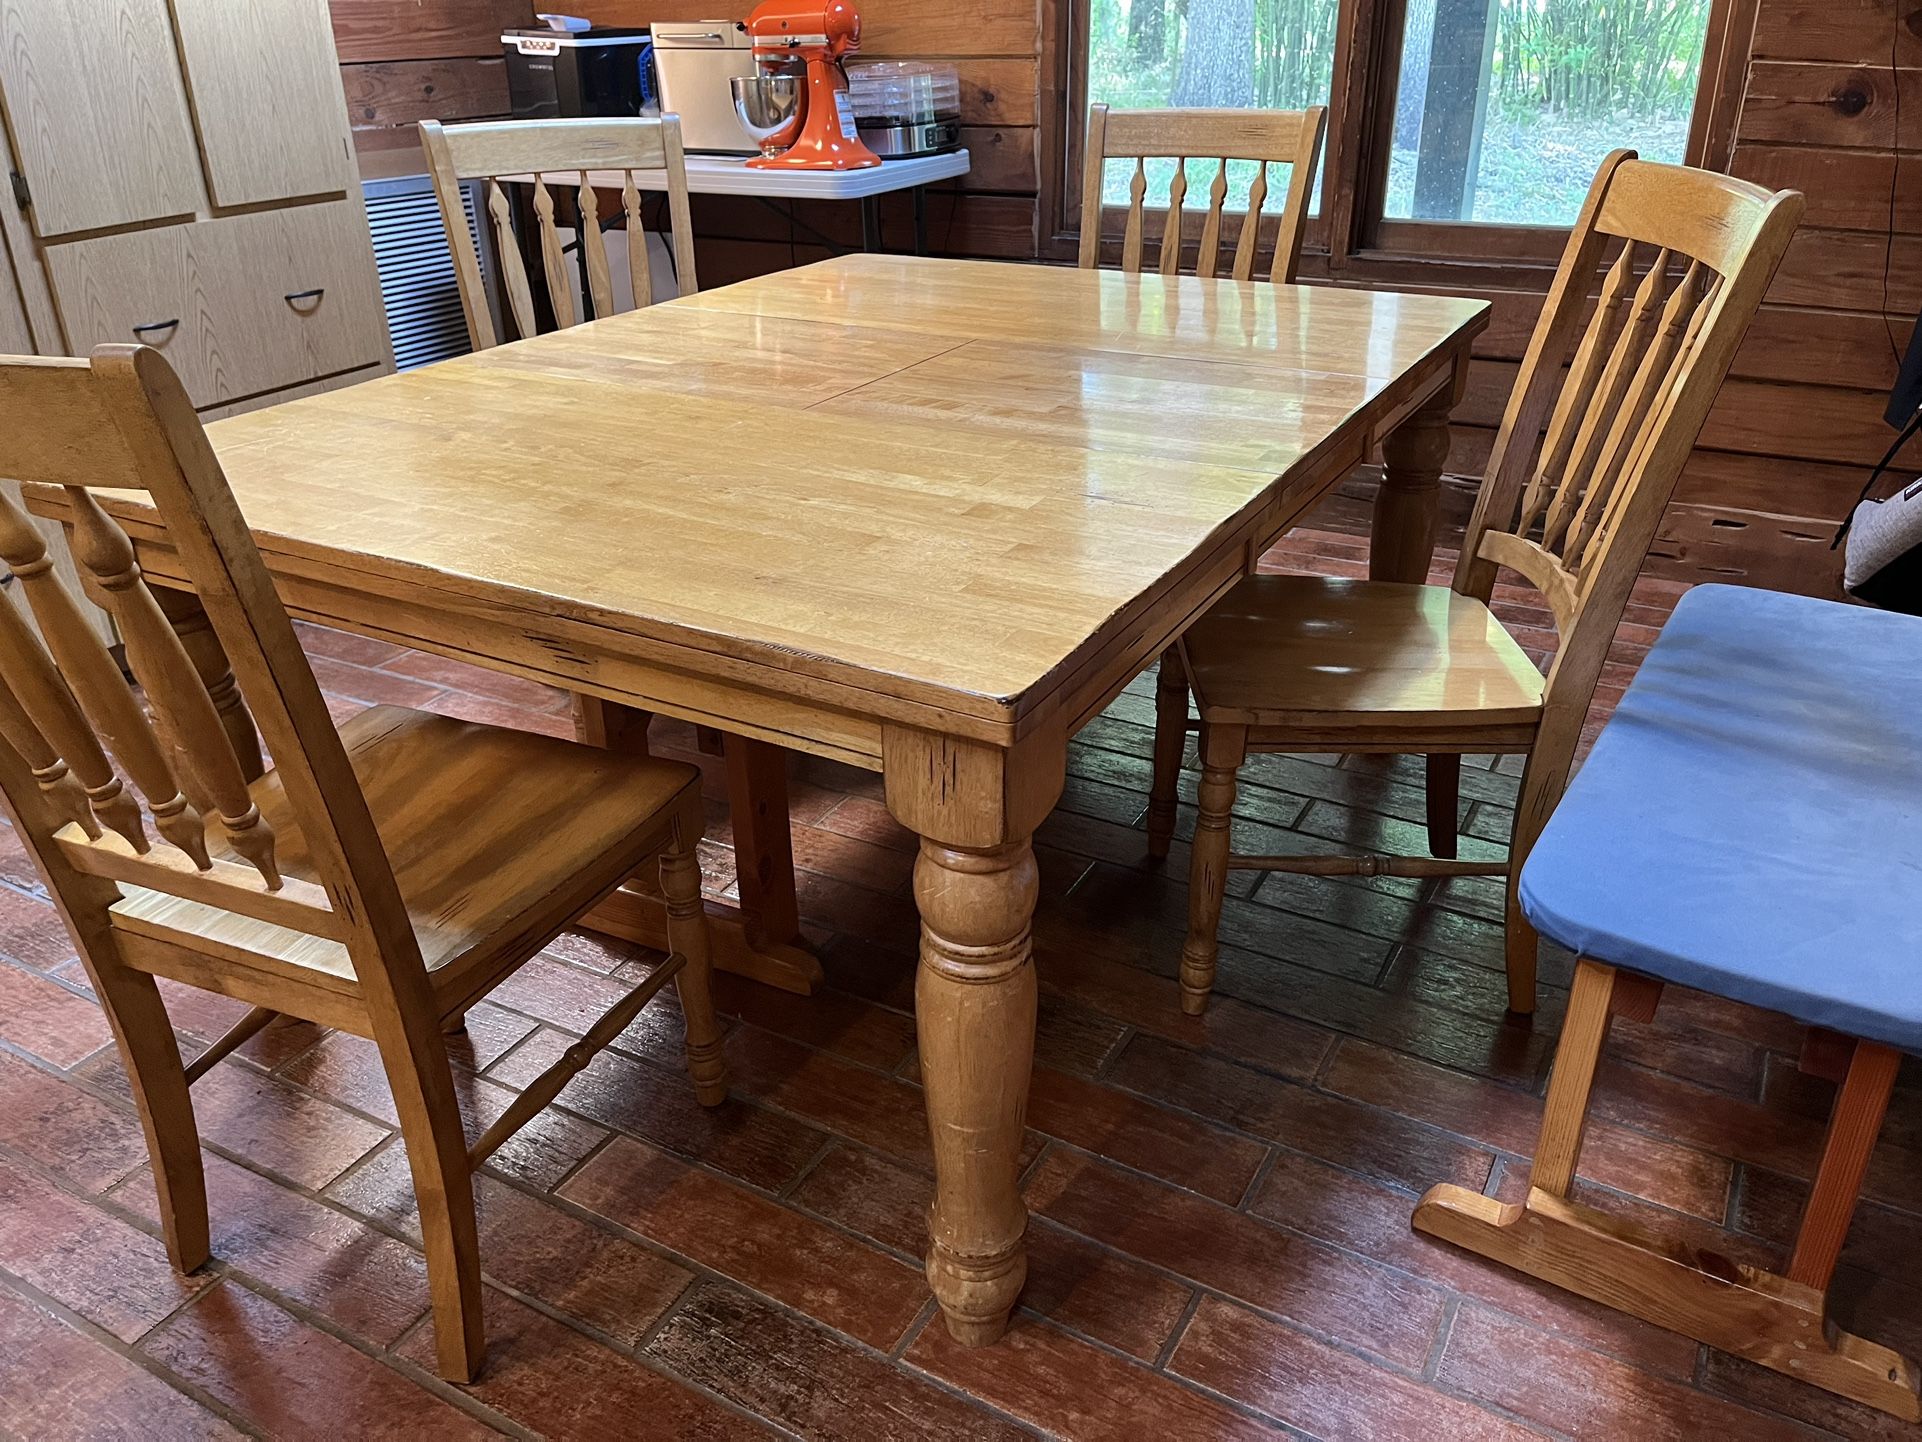 Solid Honey Wood Pine Table W/ 4 Chairs Folds Out To Large Table Plus 2 Stools